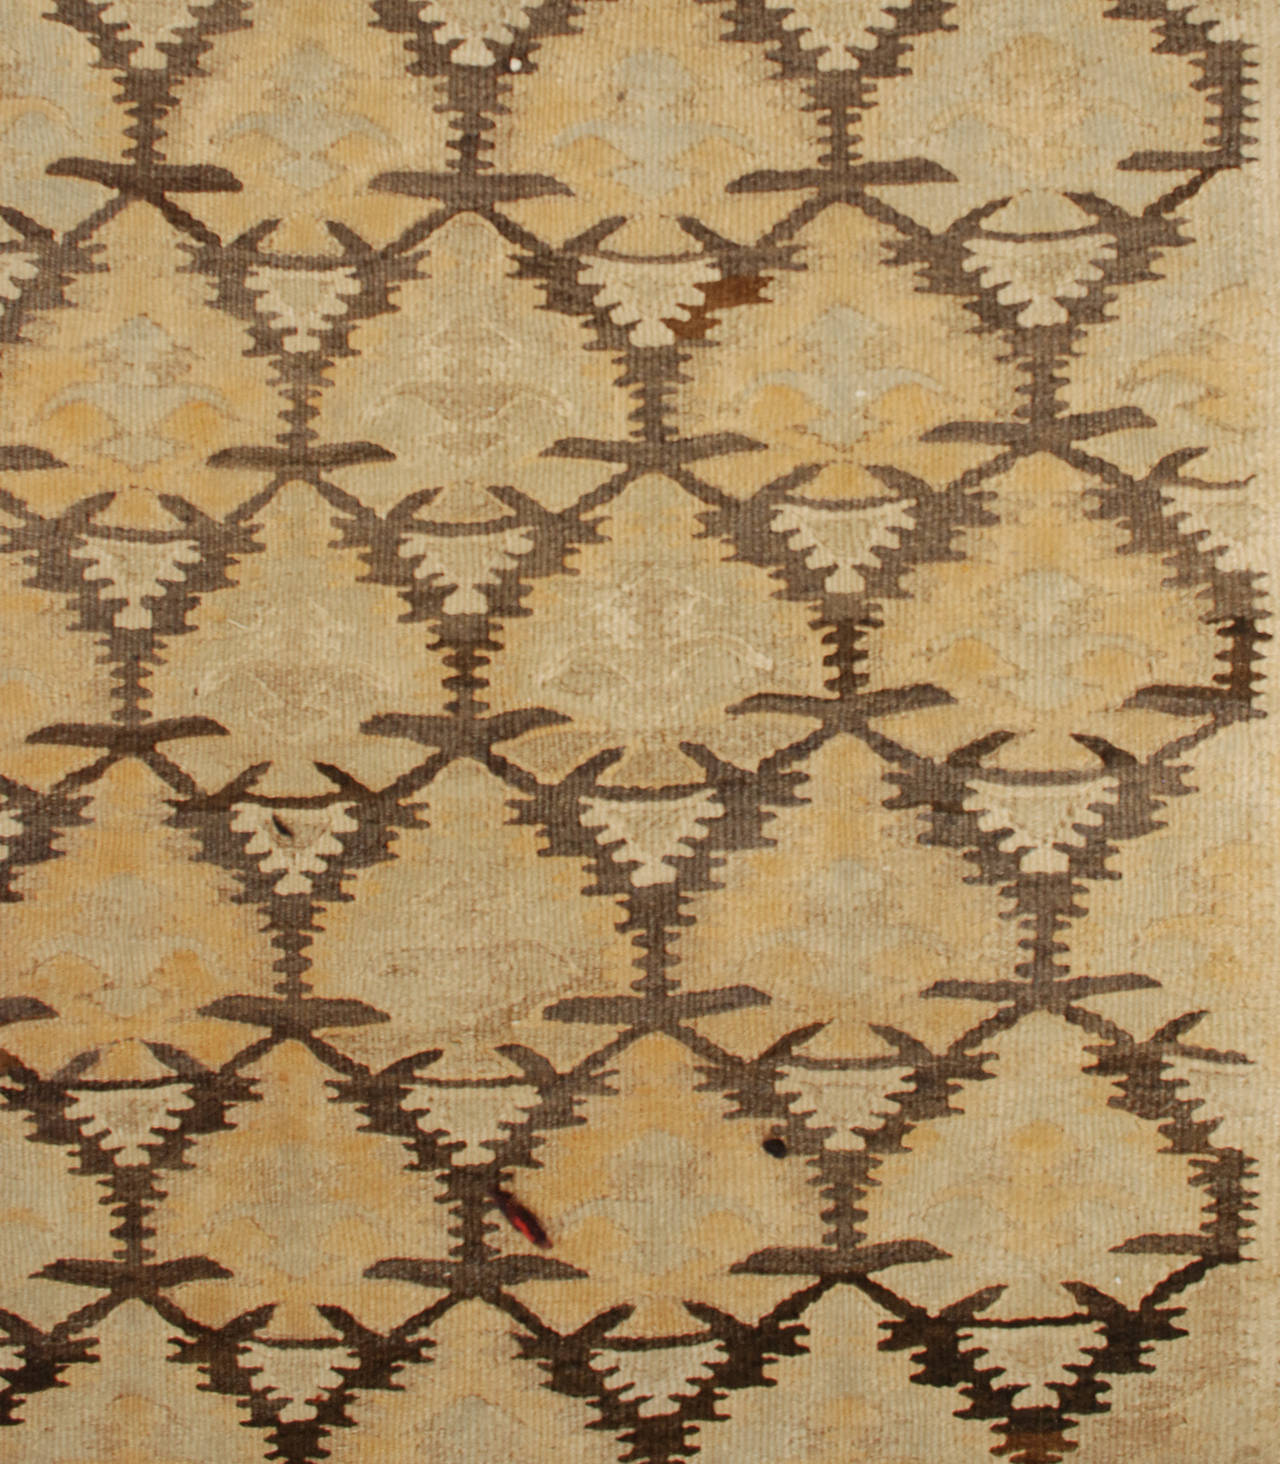 An early 20th century Persian Qazvin Kilim runner with an all-over floral pattern on a brown ground, surrounded by a complementary geometric border.